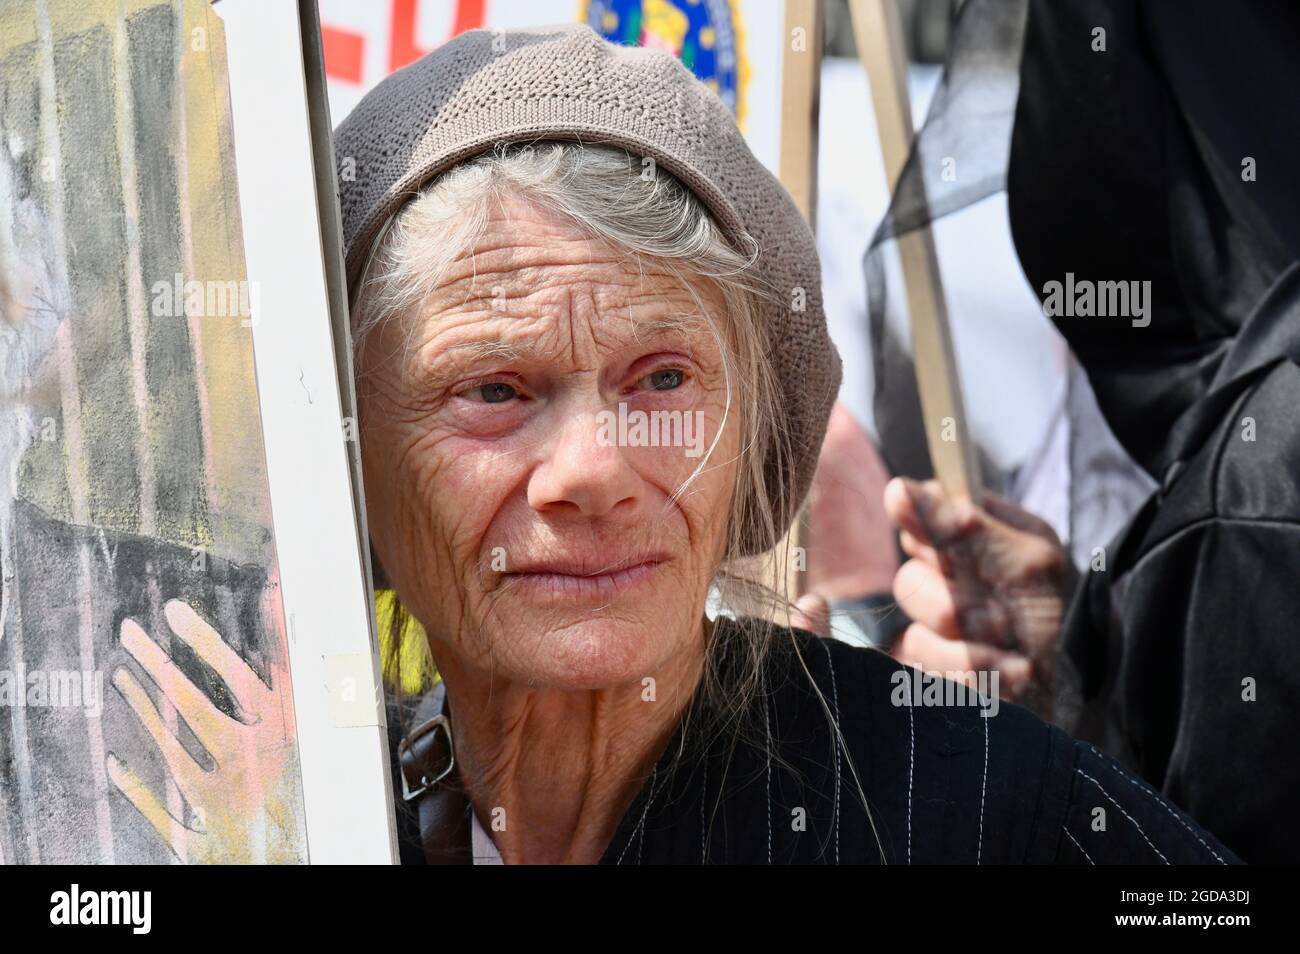 Senior Protester, Julian Assange US Extradition Appeal, High Courts of Justice, The Strand, Londra. REGNO UNITO Foto Stock